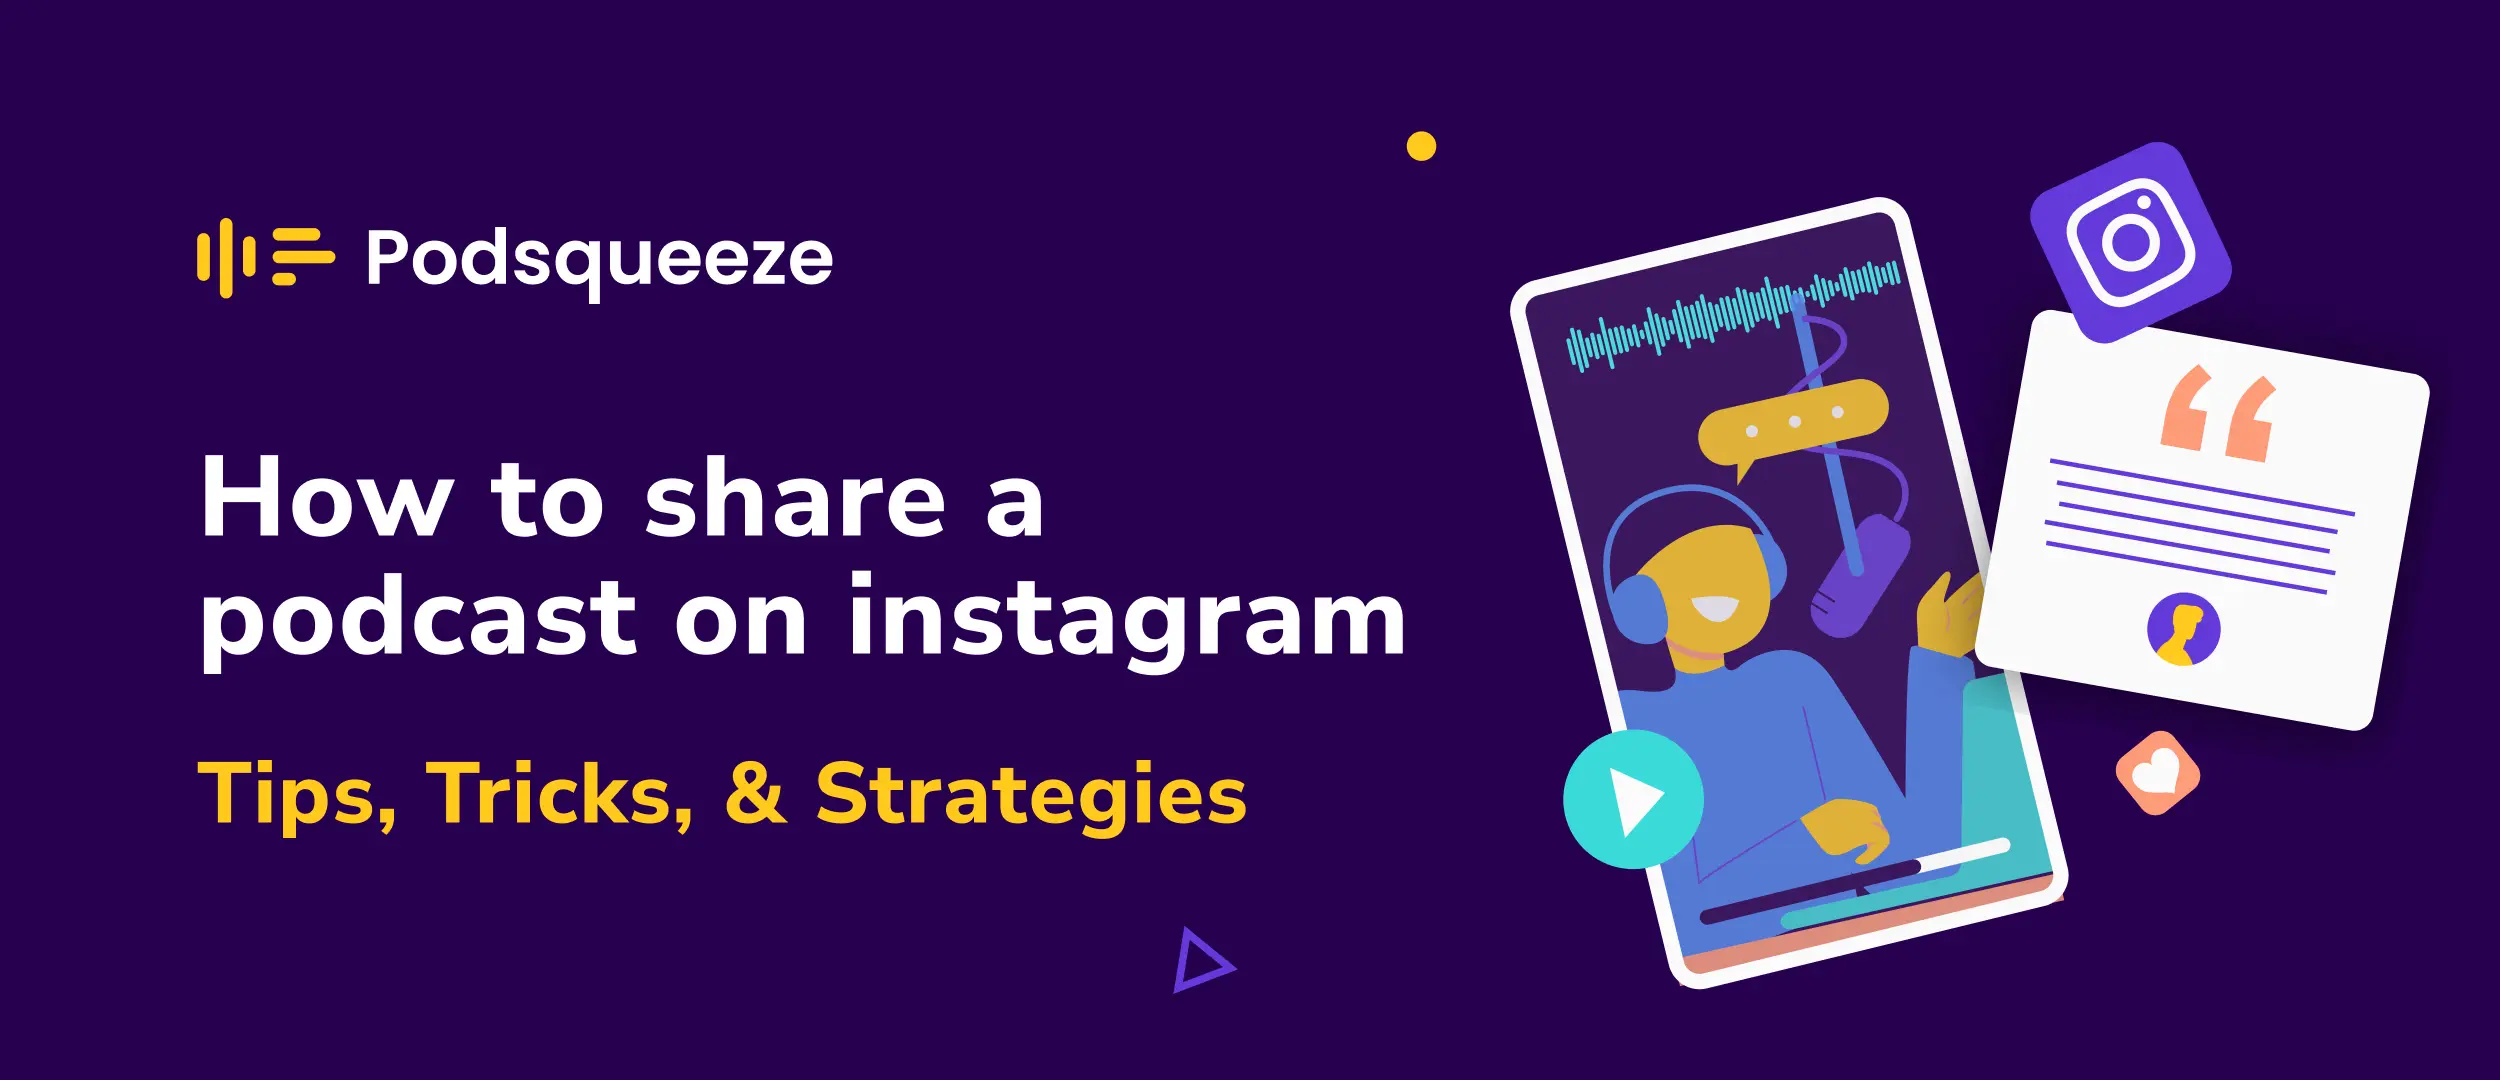 share podcast on instagram article cover